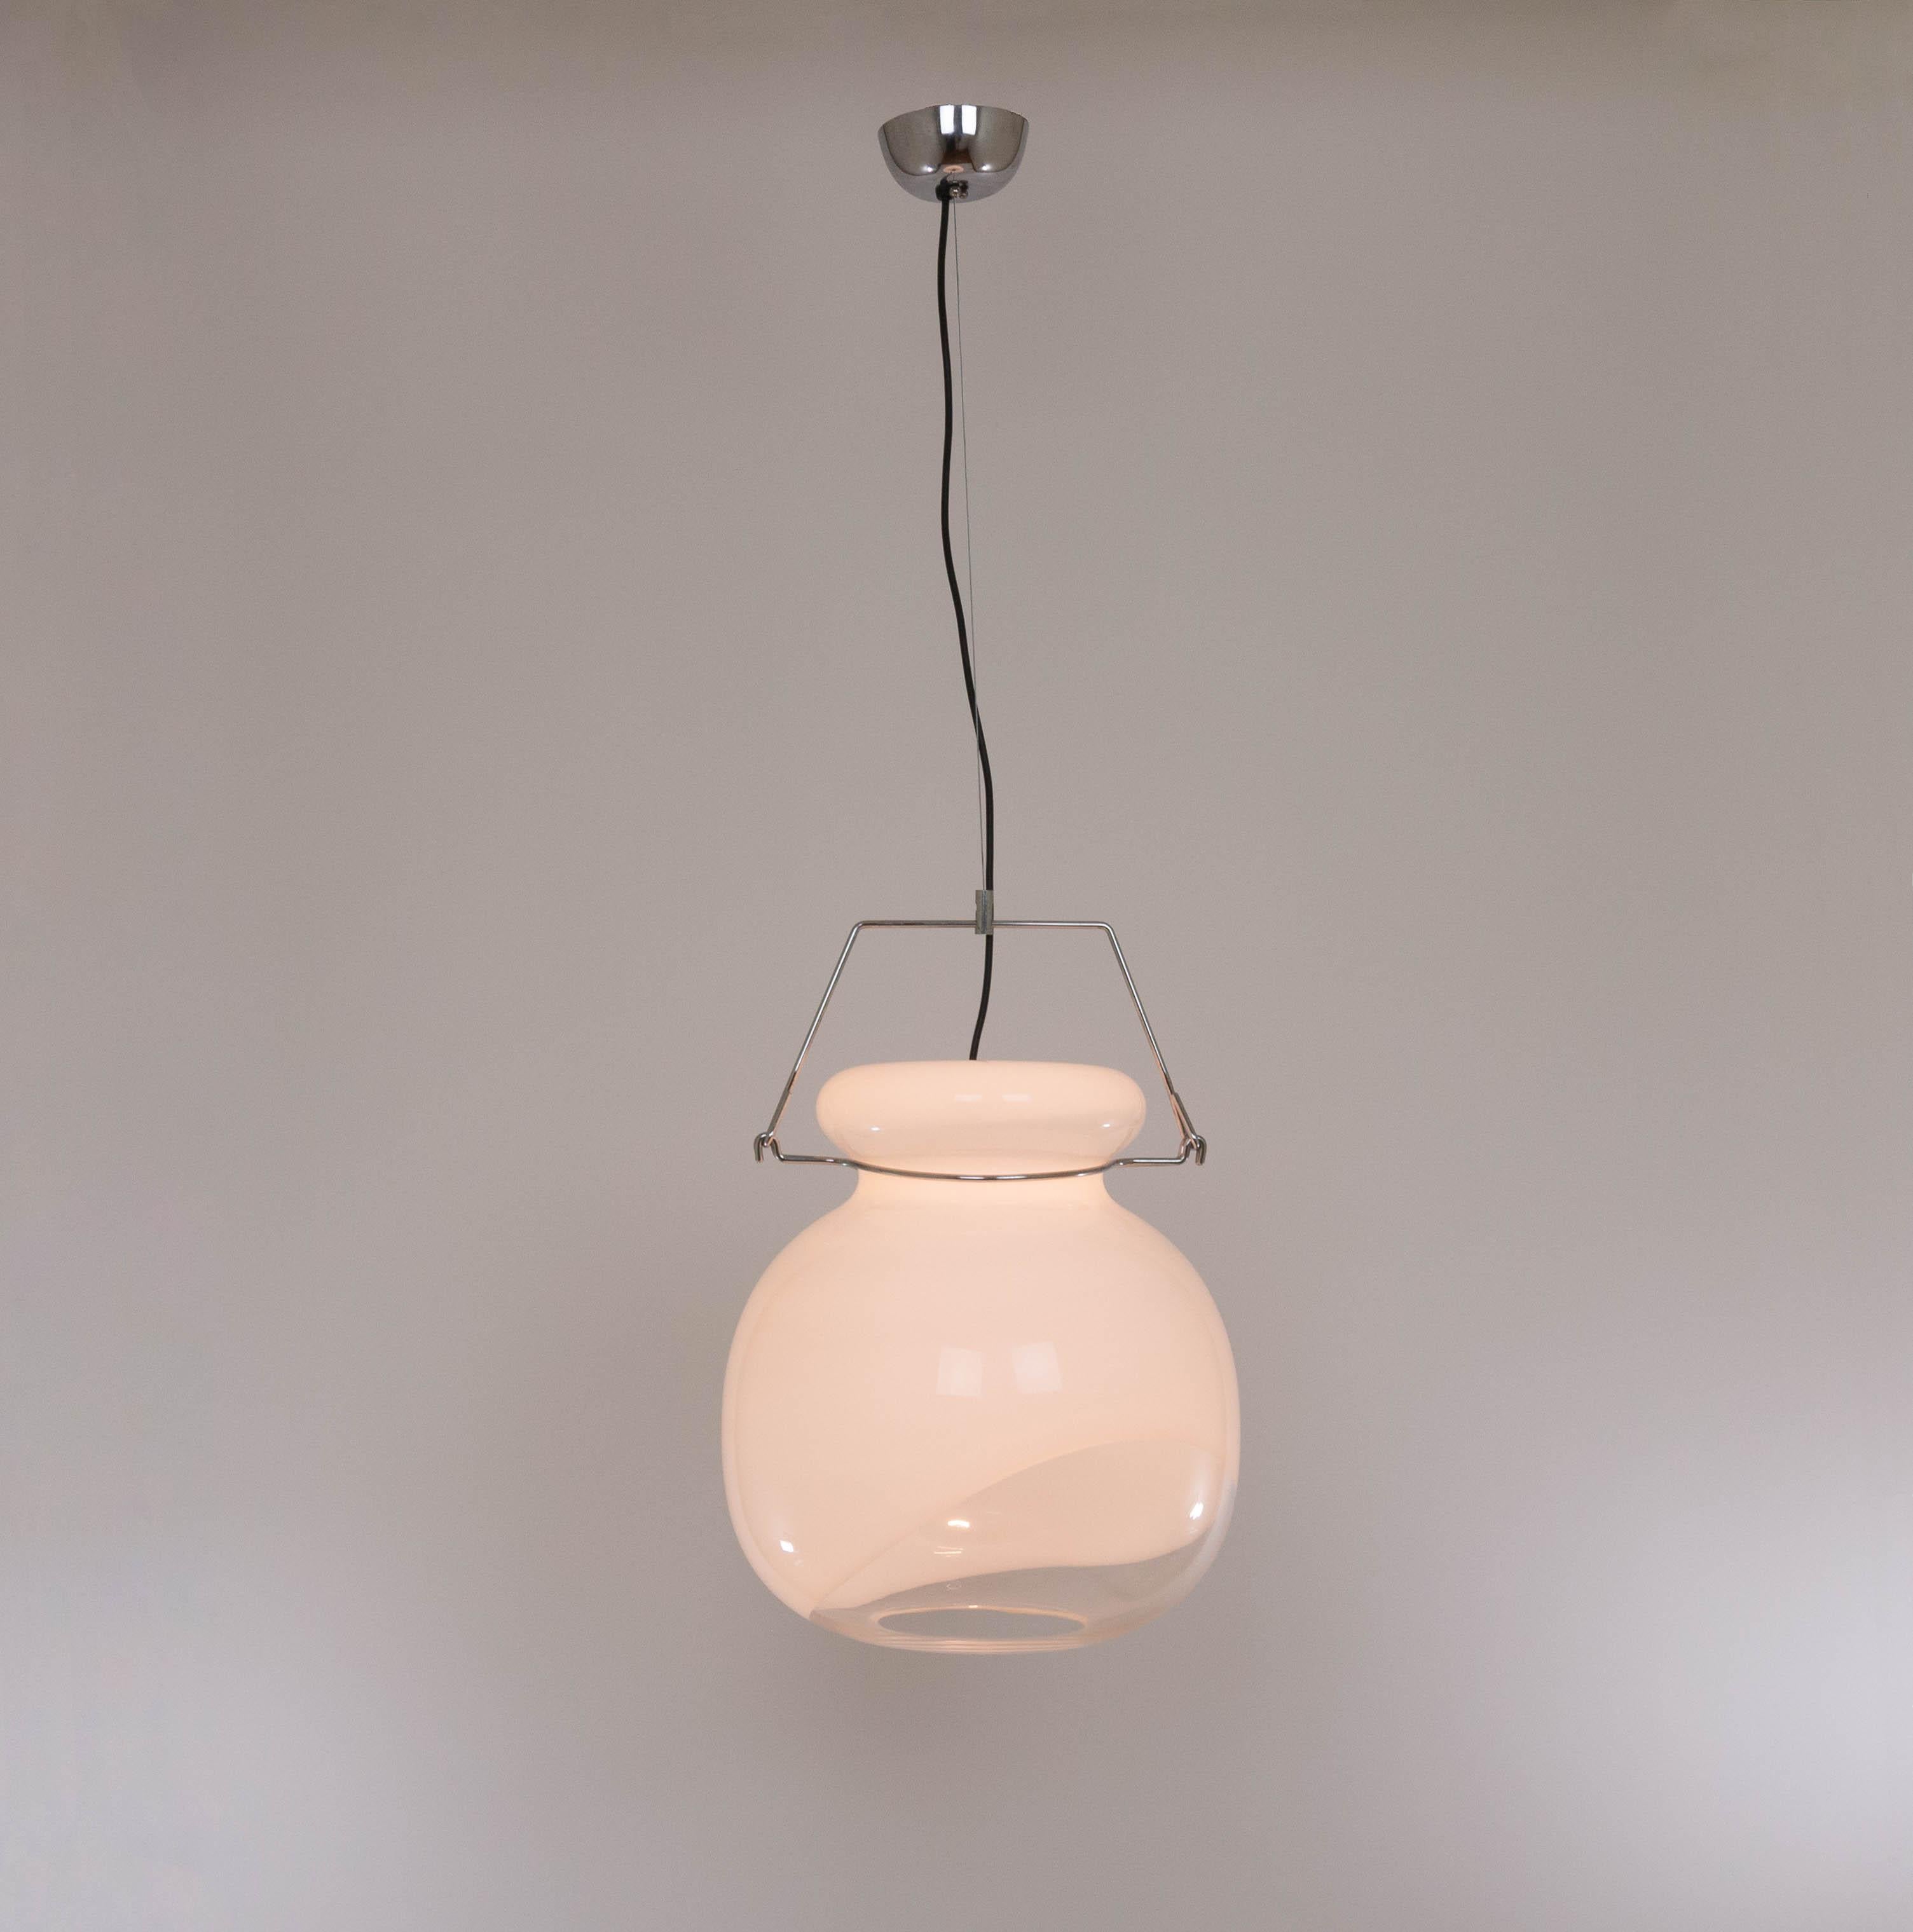 Large pendant designed by glass artist Toni Zuccheri and produced by VeArt in the 1970s

The lamp consists of a large Murano glass sphere, in a playful combination of white and transparent glass. The sphere is wider at the top of the glass in order